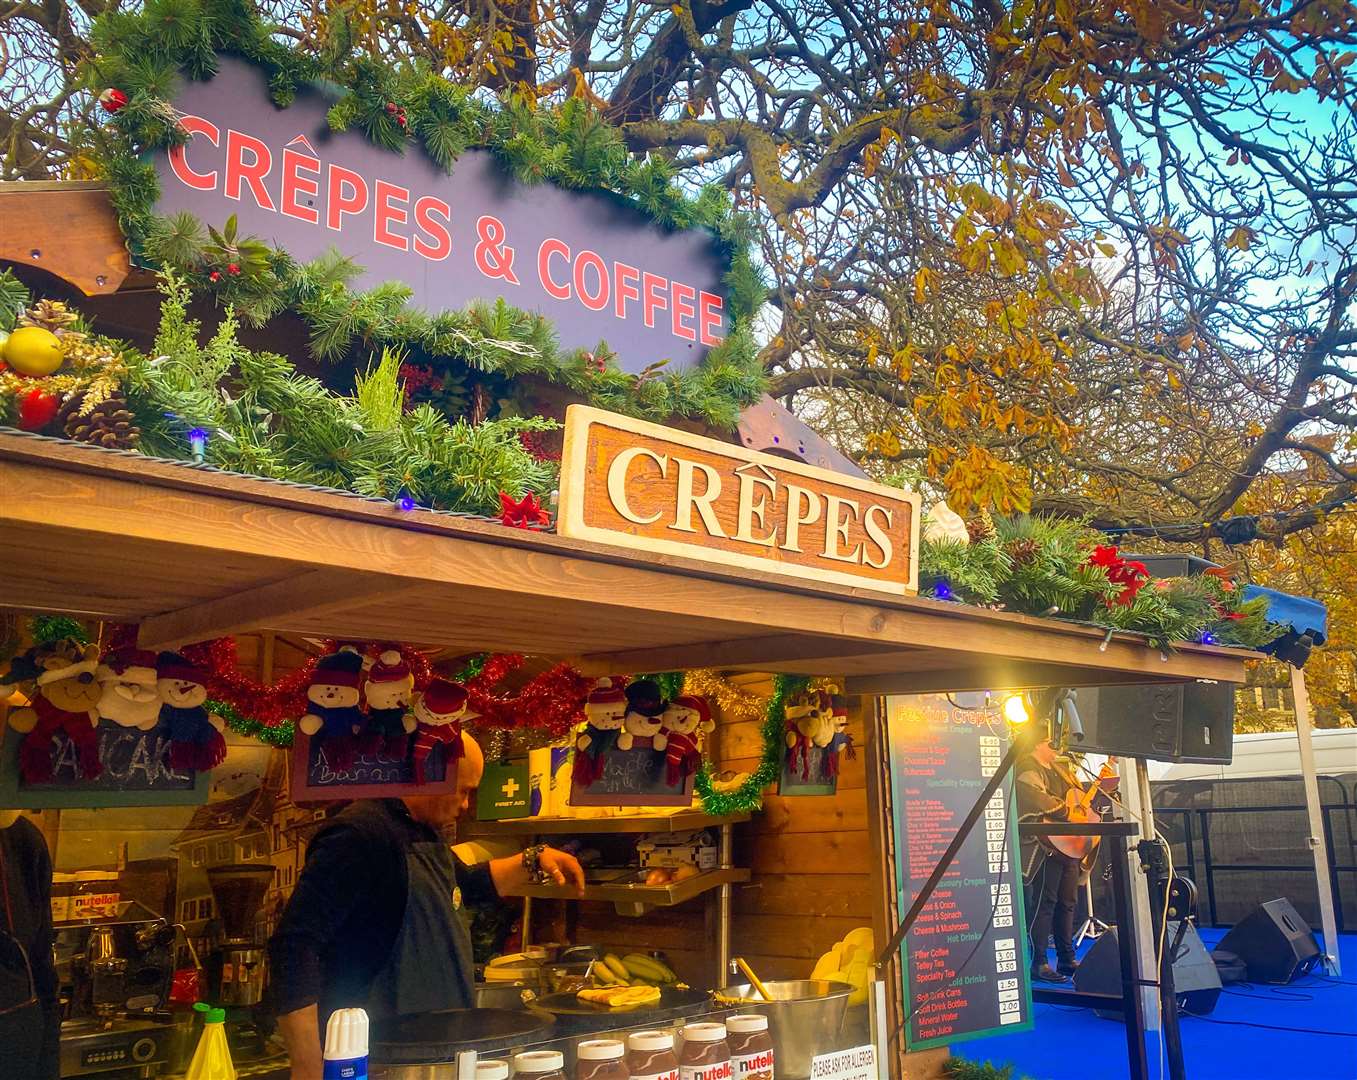 The crêpe stands had lots of toppings on offer, but we went for the classic lemon and sugar